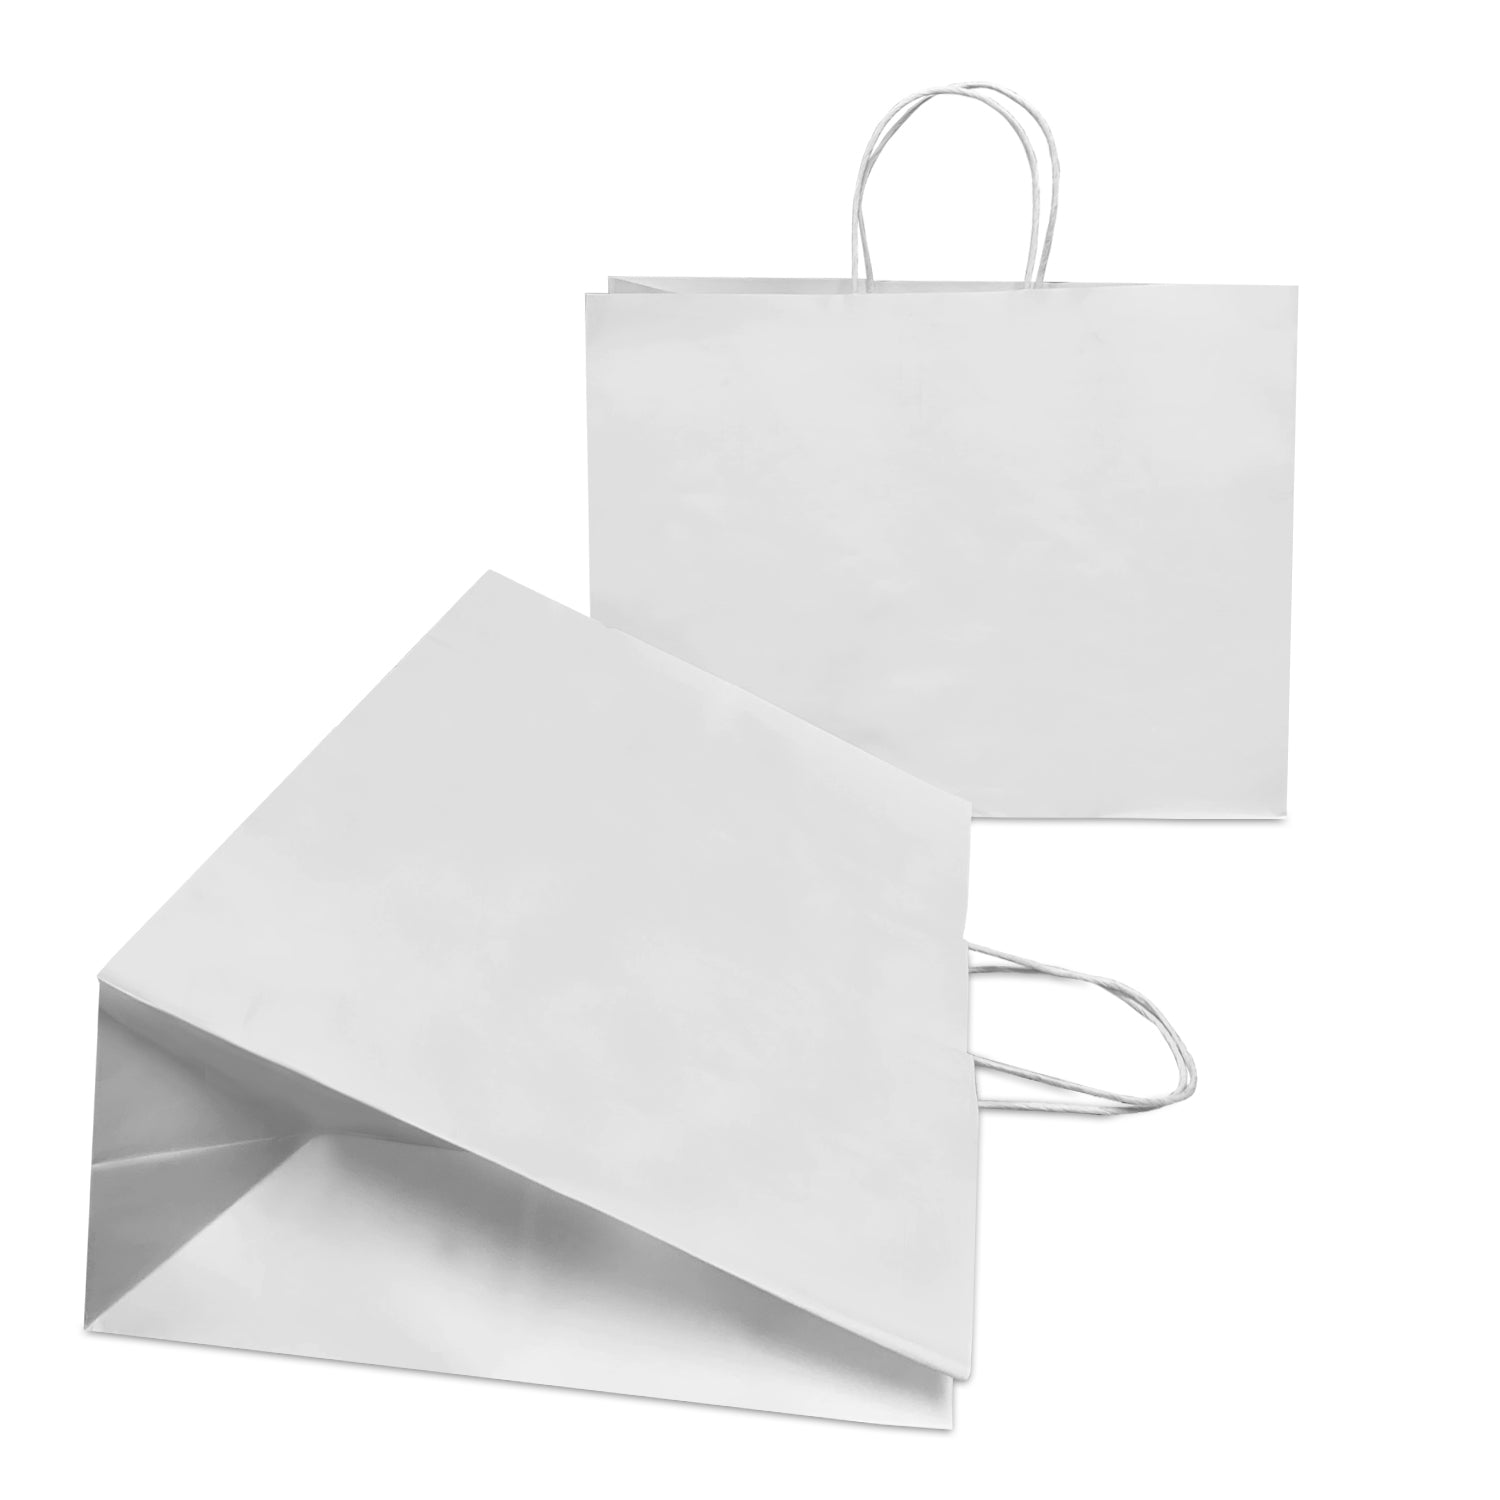 8 X 4.25 X 10.25 Heavy Duty White Twisted Handle Paper Bags 250/Case -  Canada Brown